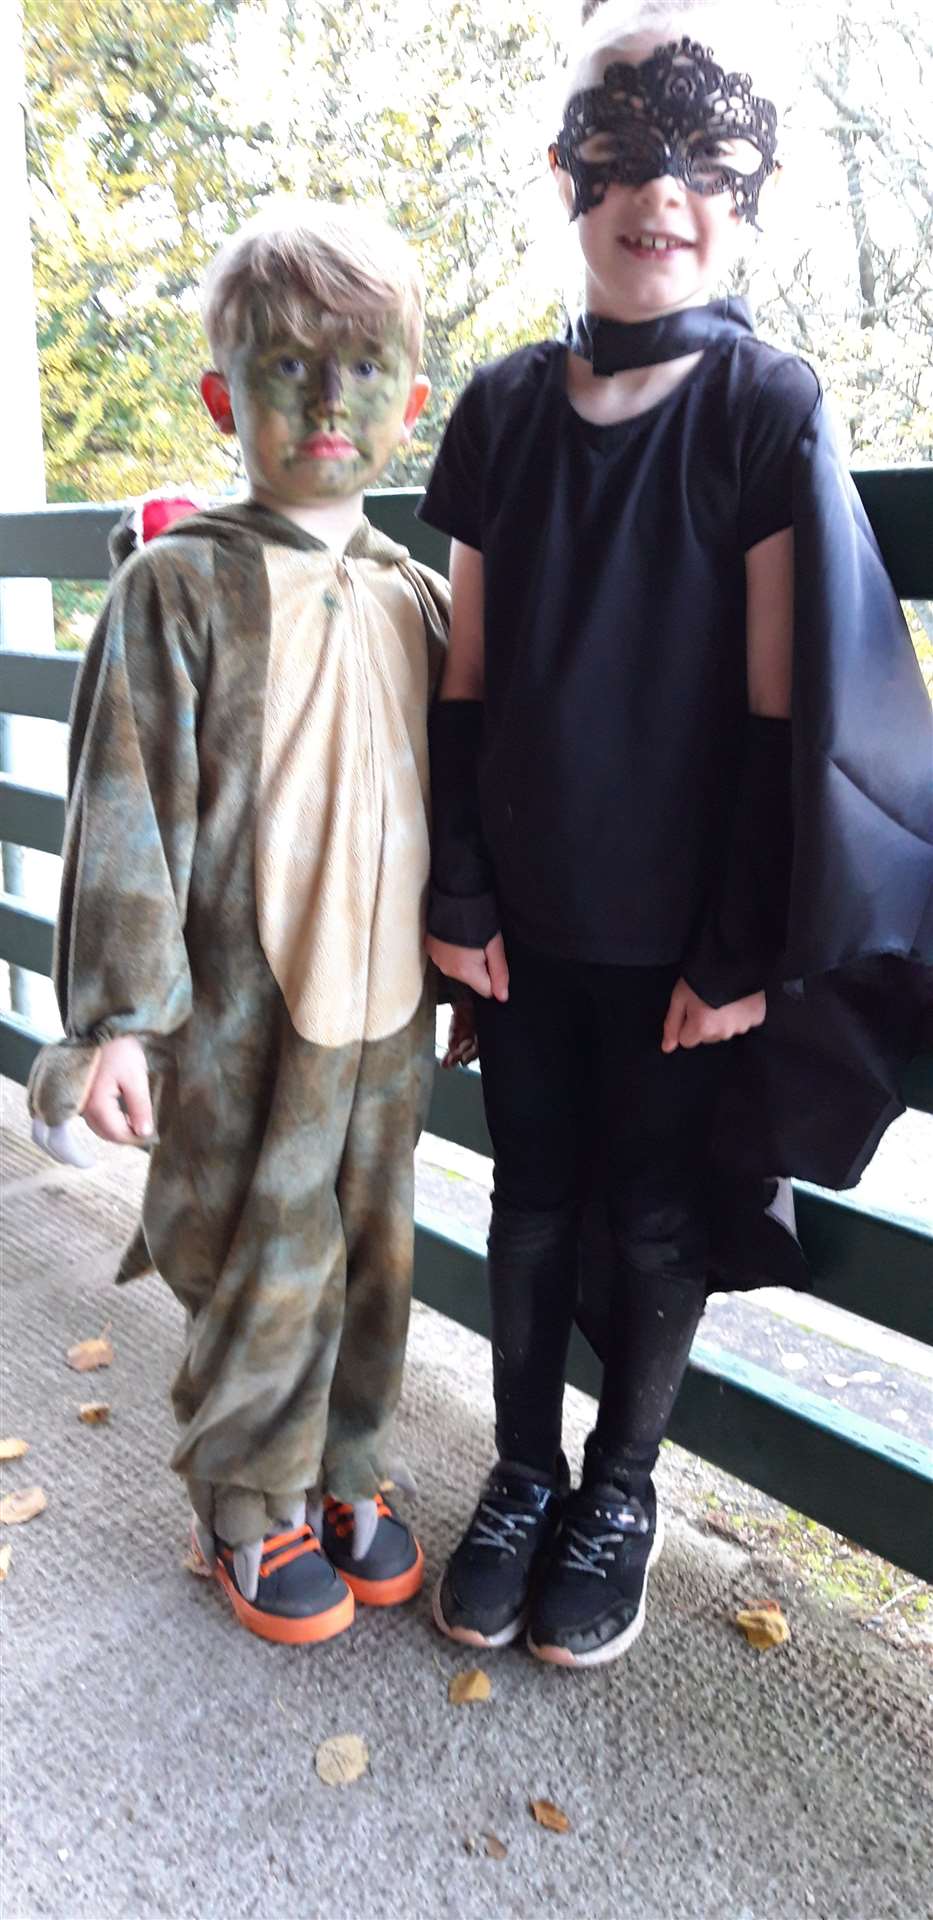 Ethan Lee (5) dressed up as a dinosaur and Hallie Meldrum (8) as a bat.